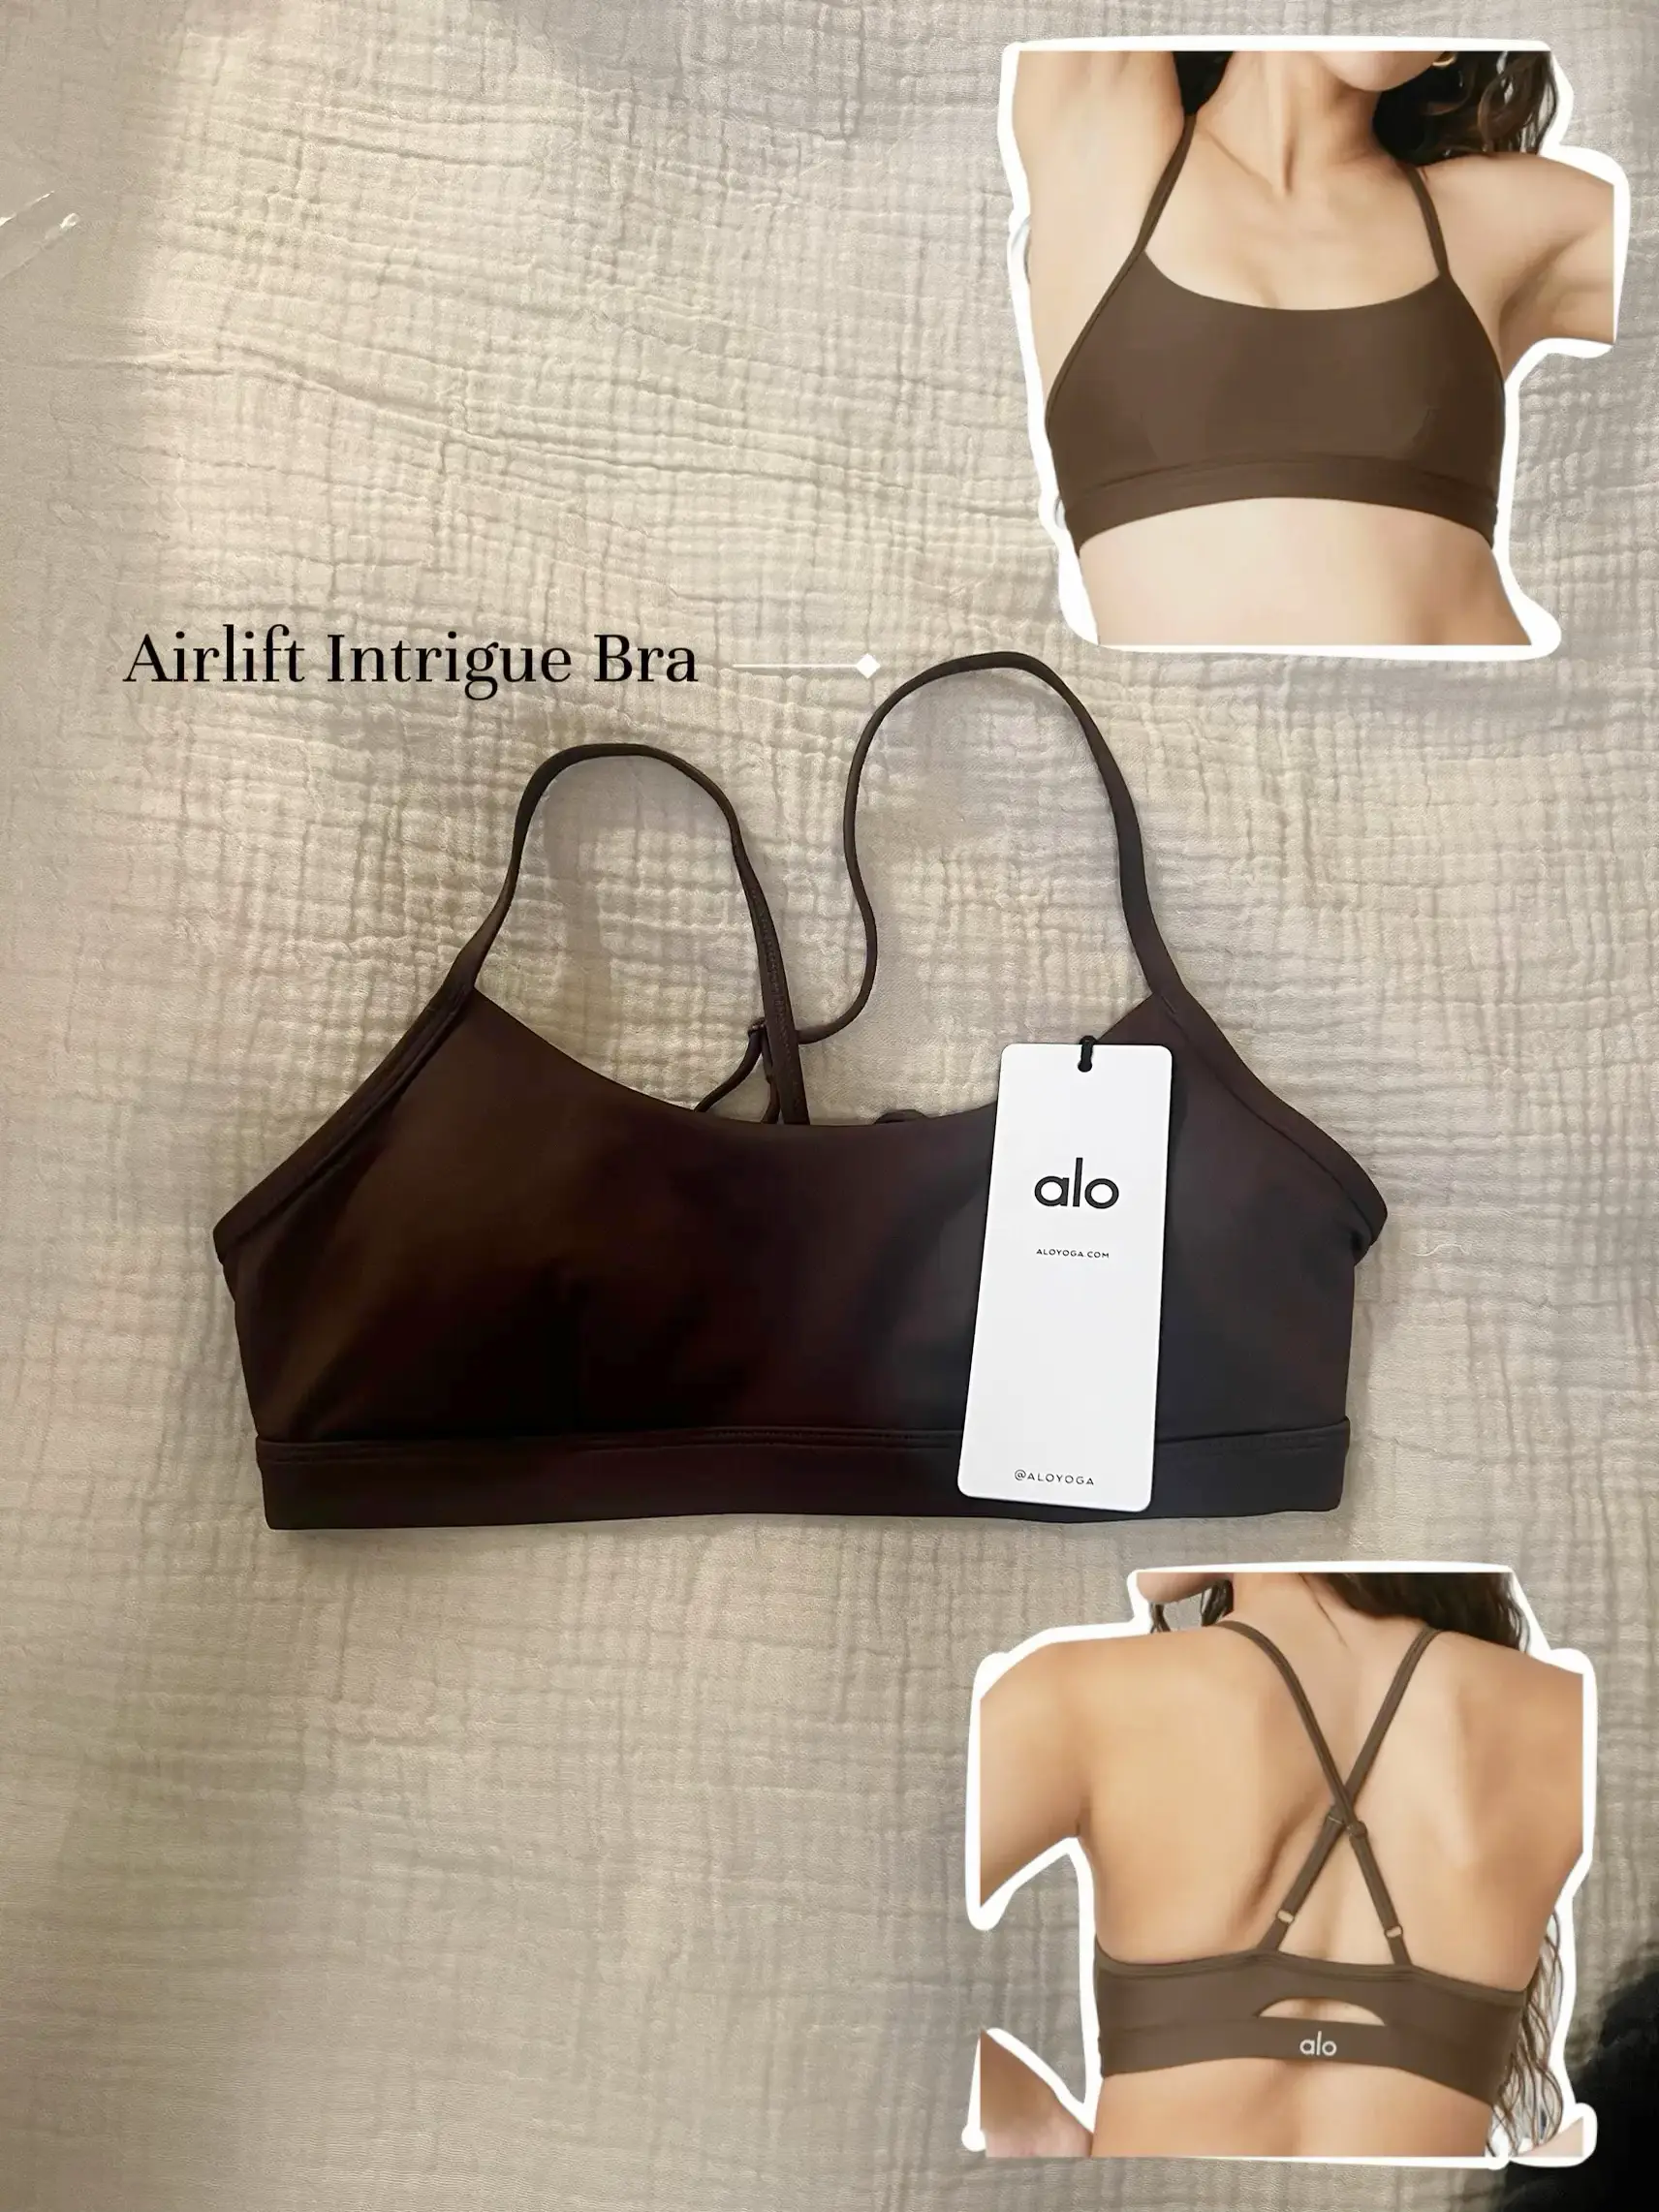 Airlift Intrigue Bra in True Navy by Alo Yoga